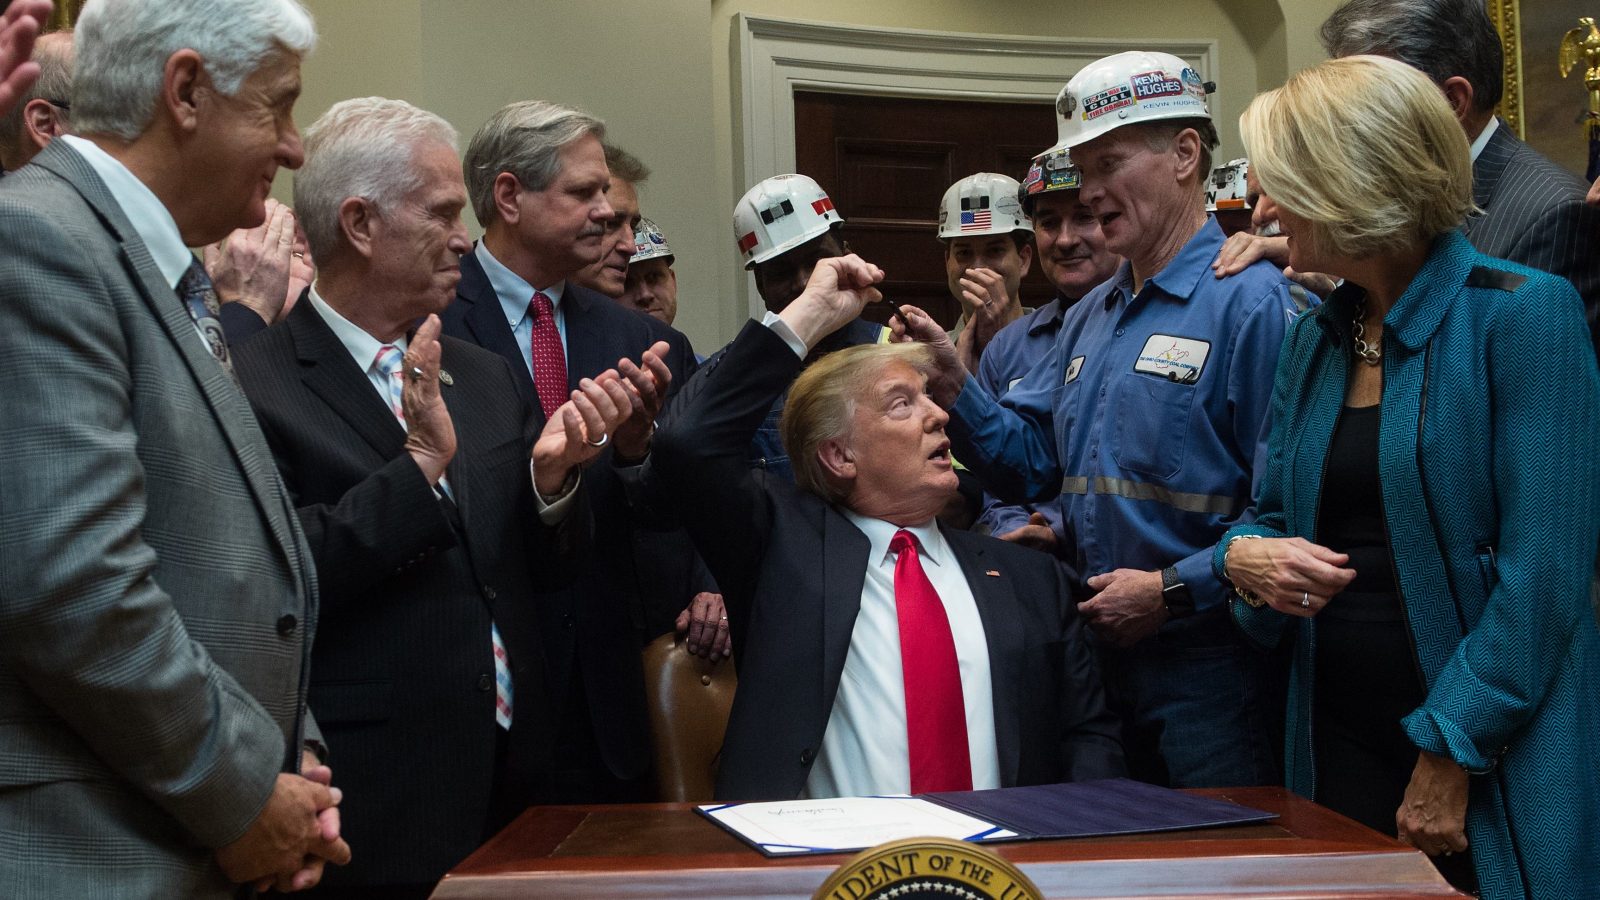 President Donald Trump hands coal miners the pen he used to sign a bill eliminating regulations on the mining industry in the Roosevelt Room at the White House in Washington, D.C.